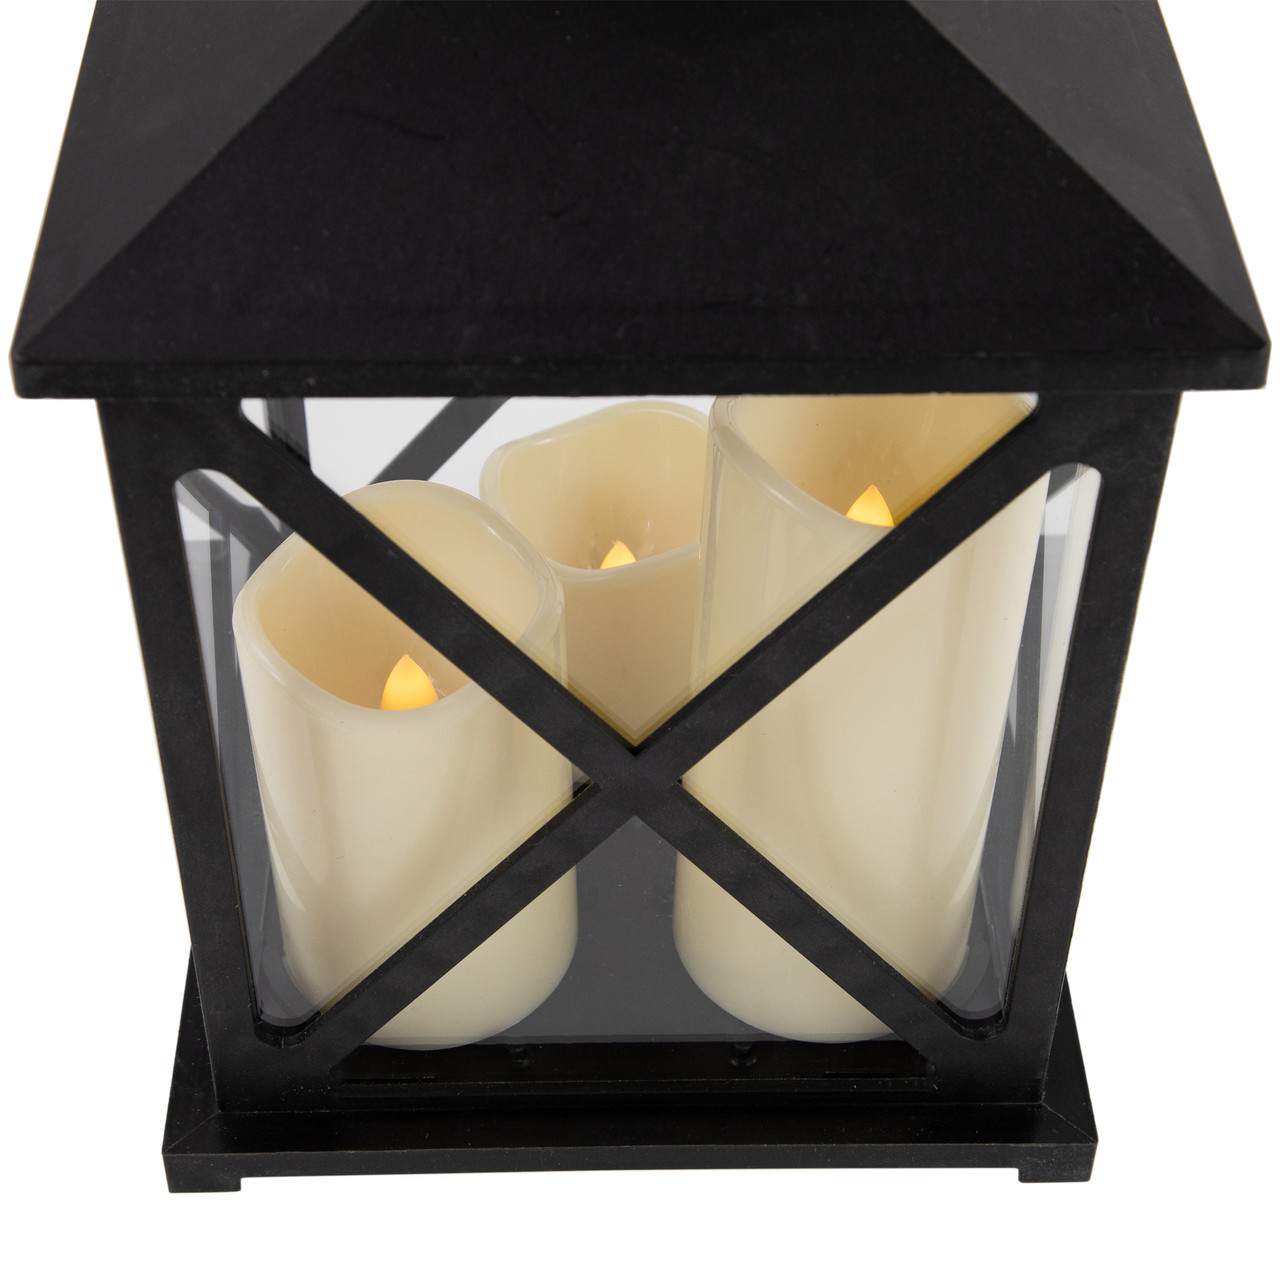 Northlight 9 LED Battery Operated Black Lantern with Flameless Candle